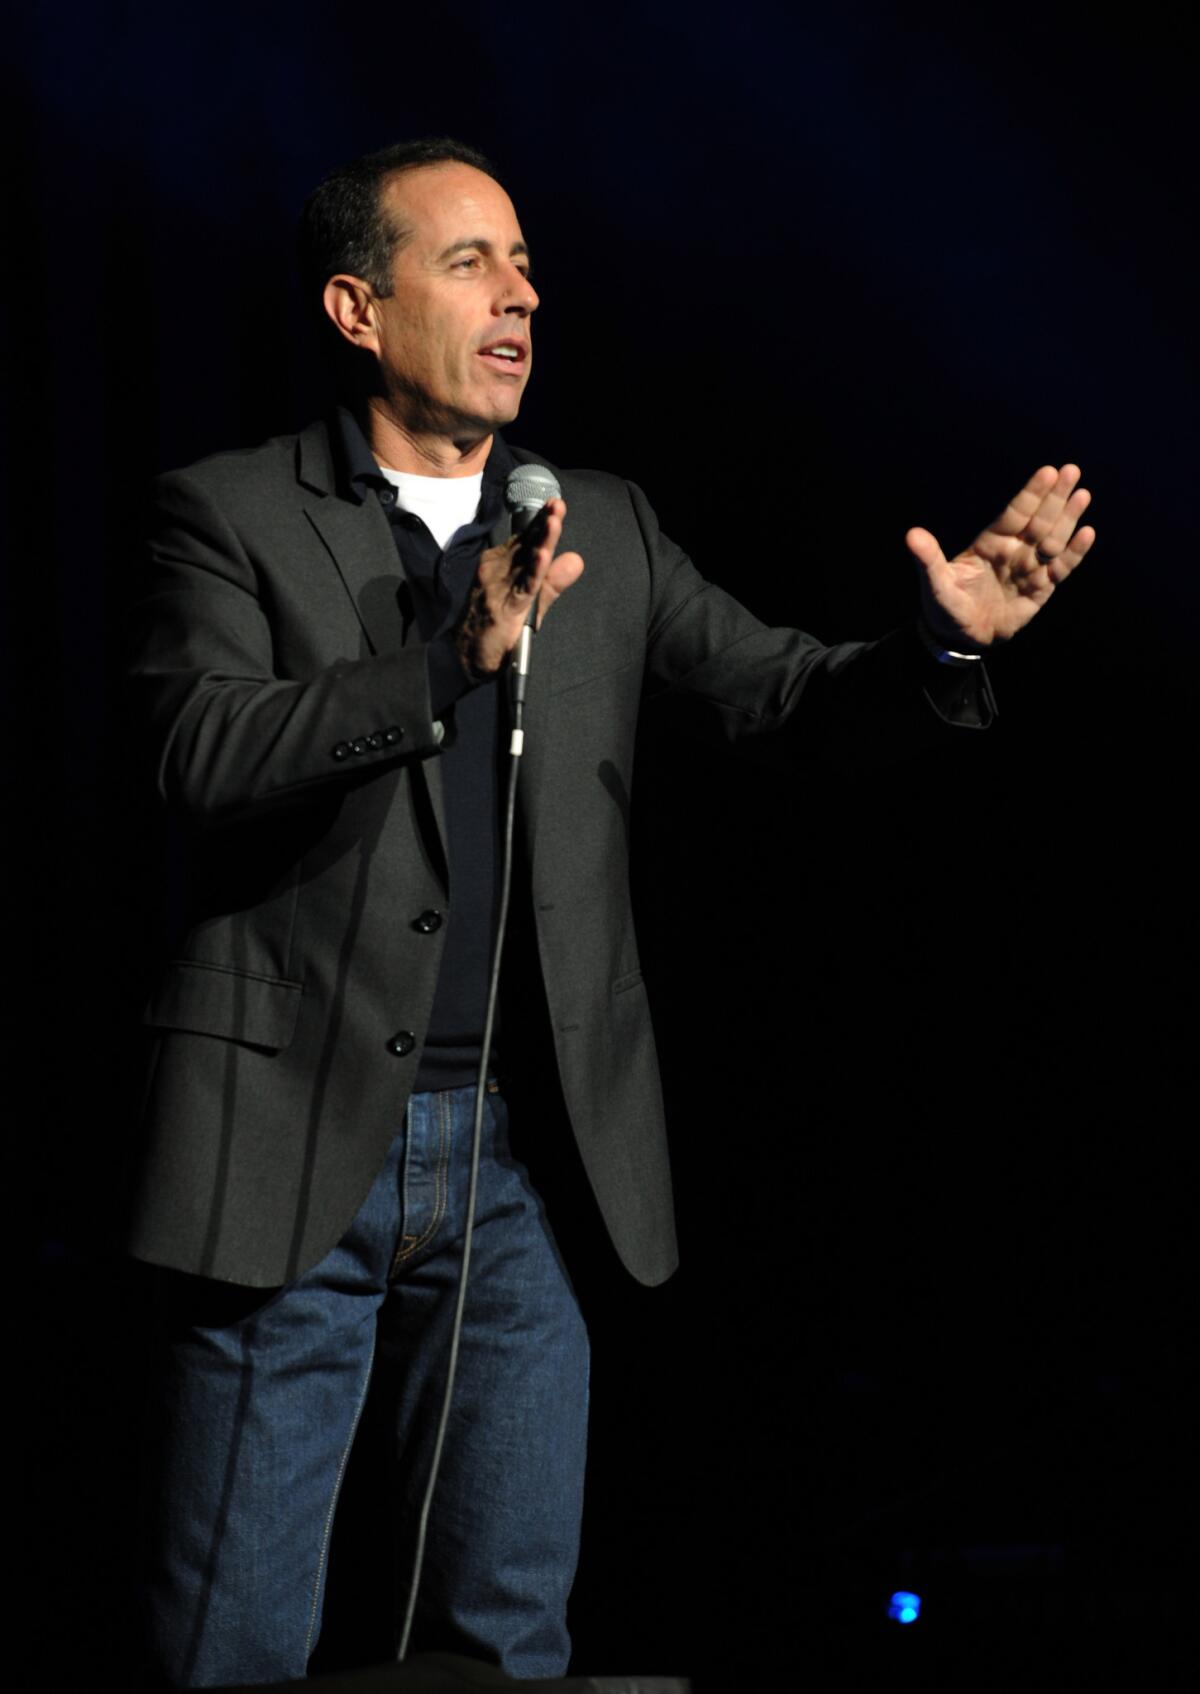 Comedian Jerry Seinfeld appeared in a Super Bowl ad with Jason Alexander and Wayne Knight for his "Comedians in Cars Getting Coffee" Web series.